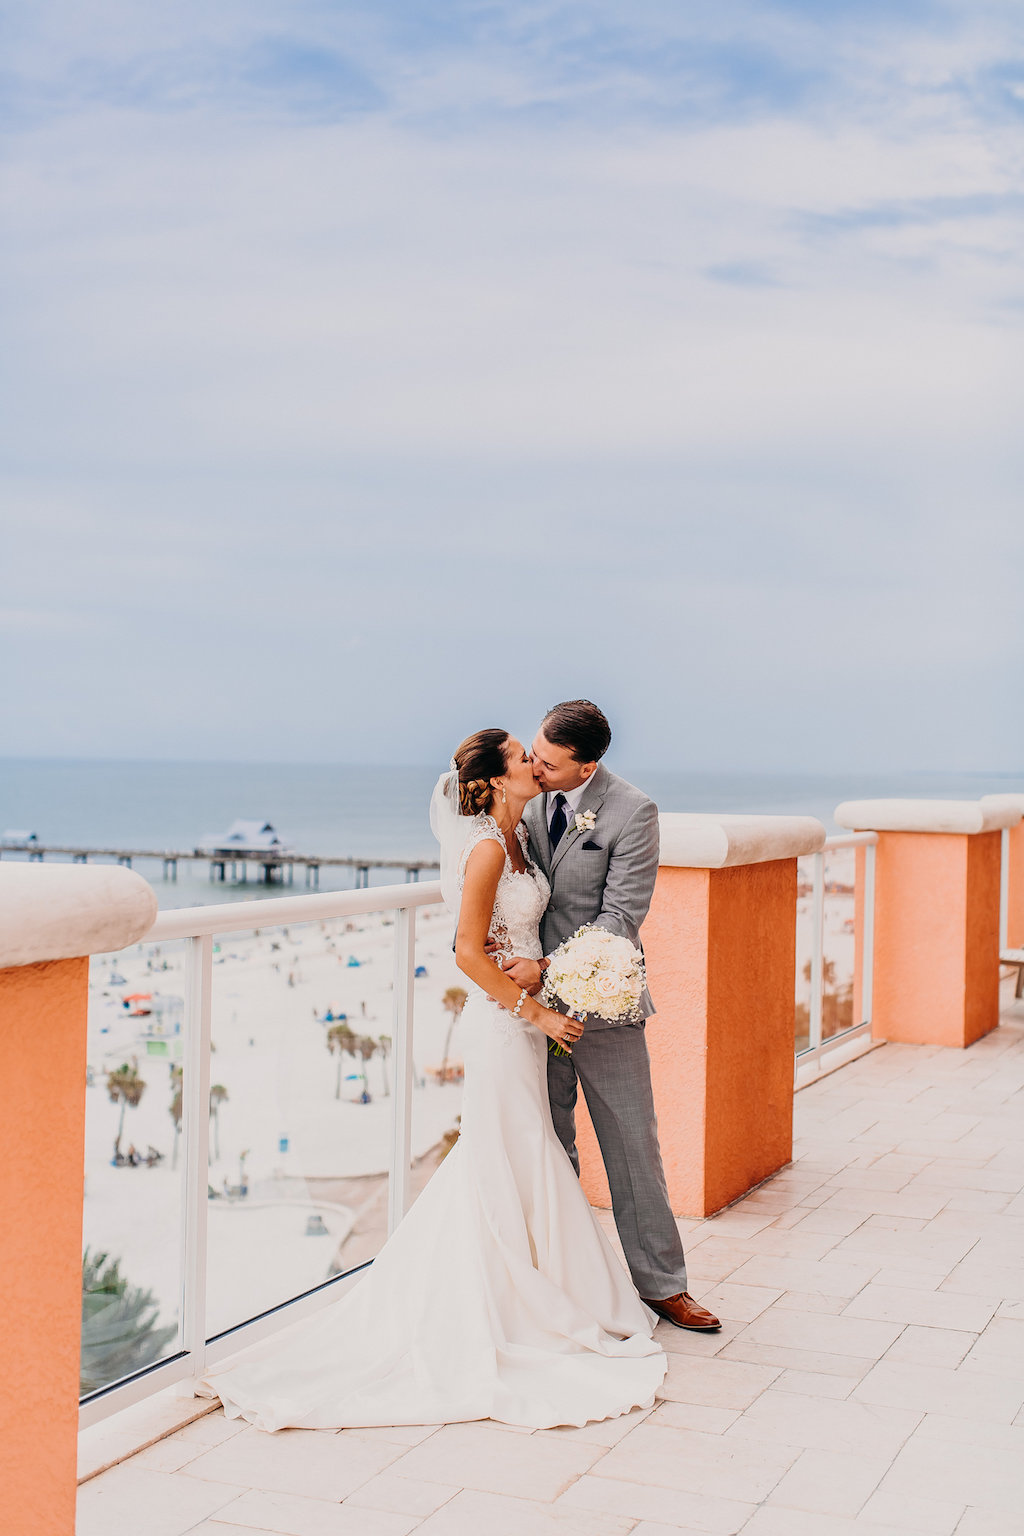 Outdoor Rooftop Bride and Groom Wedding Portrait, Bride in Lace Illusion Back Sincerity Bridal Wedding Dress, Groom in Gray Suit with Navy Blue Tie and White Floral Boutonniere | Tampa Bay Beachfront Hotel Wedding Venue Hyatt Regency Clearwater Beach | Wedding Photographer Rad Red Creative